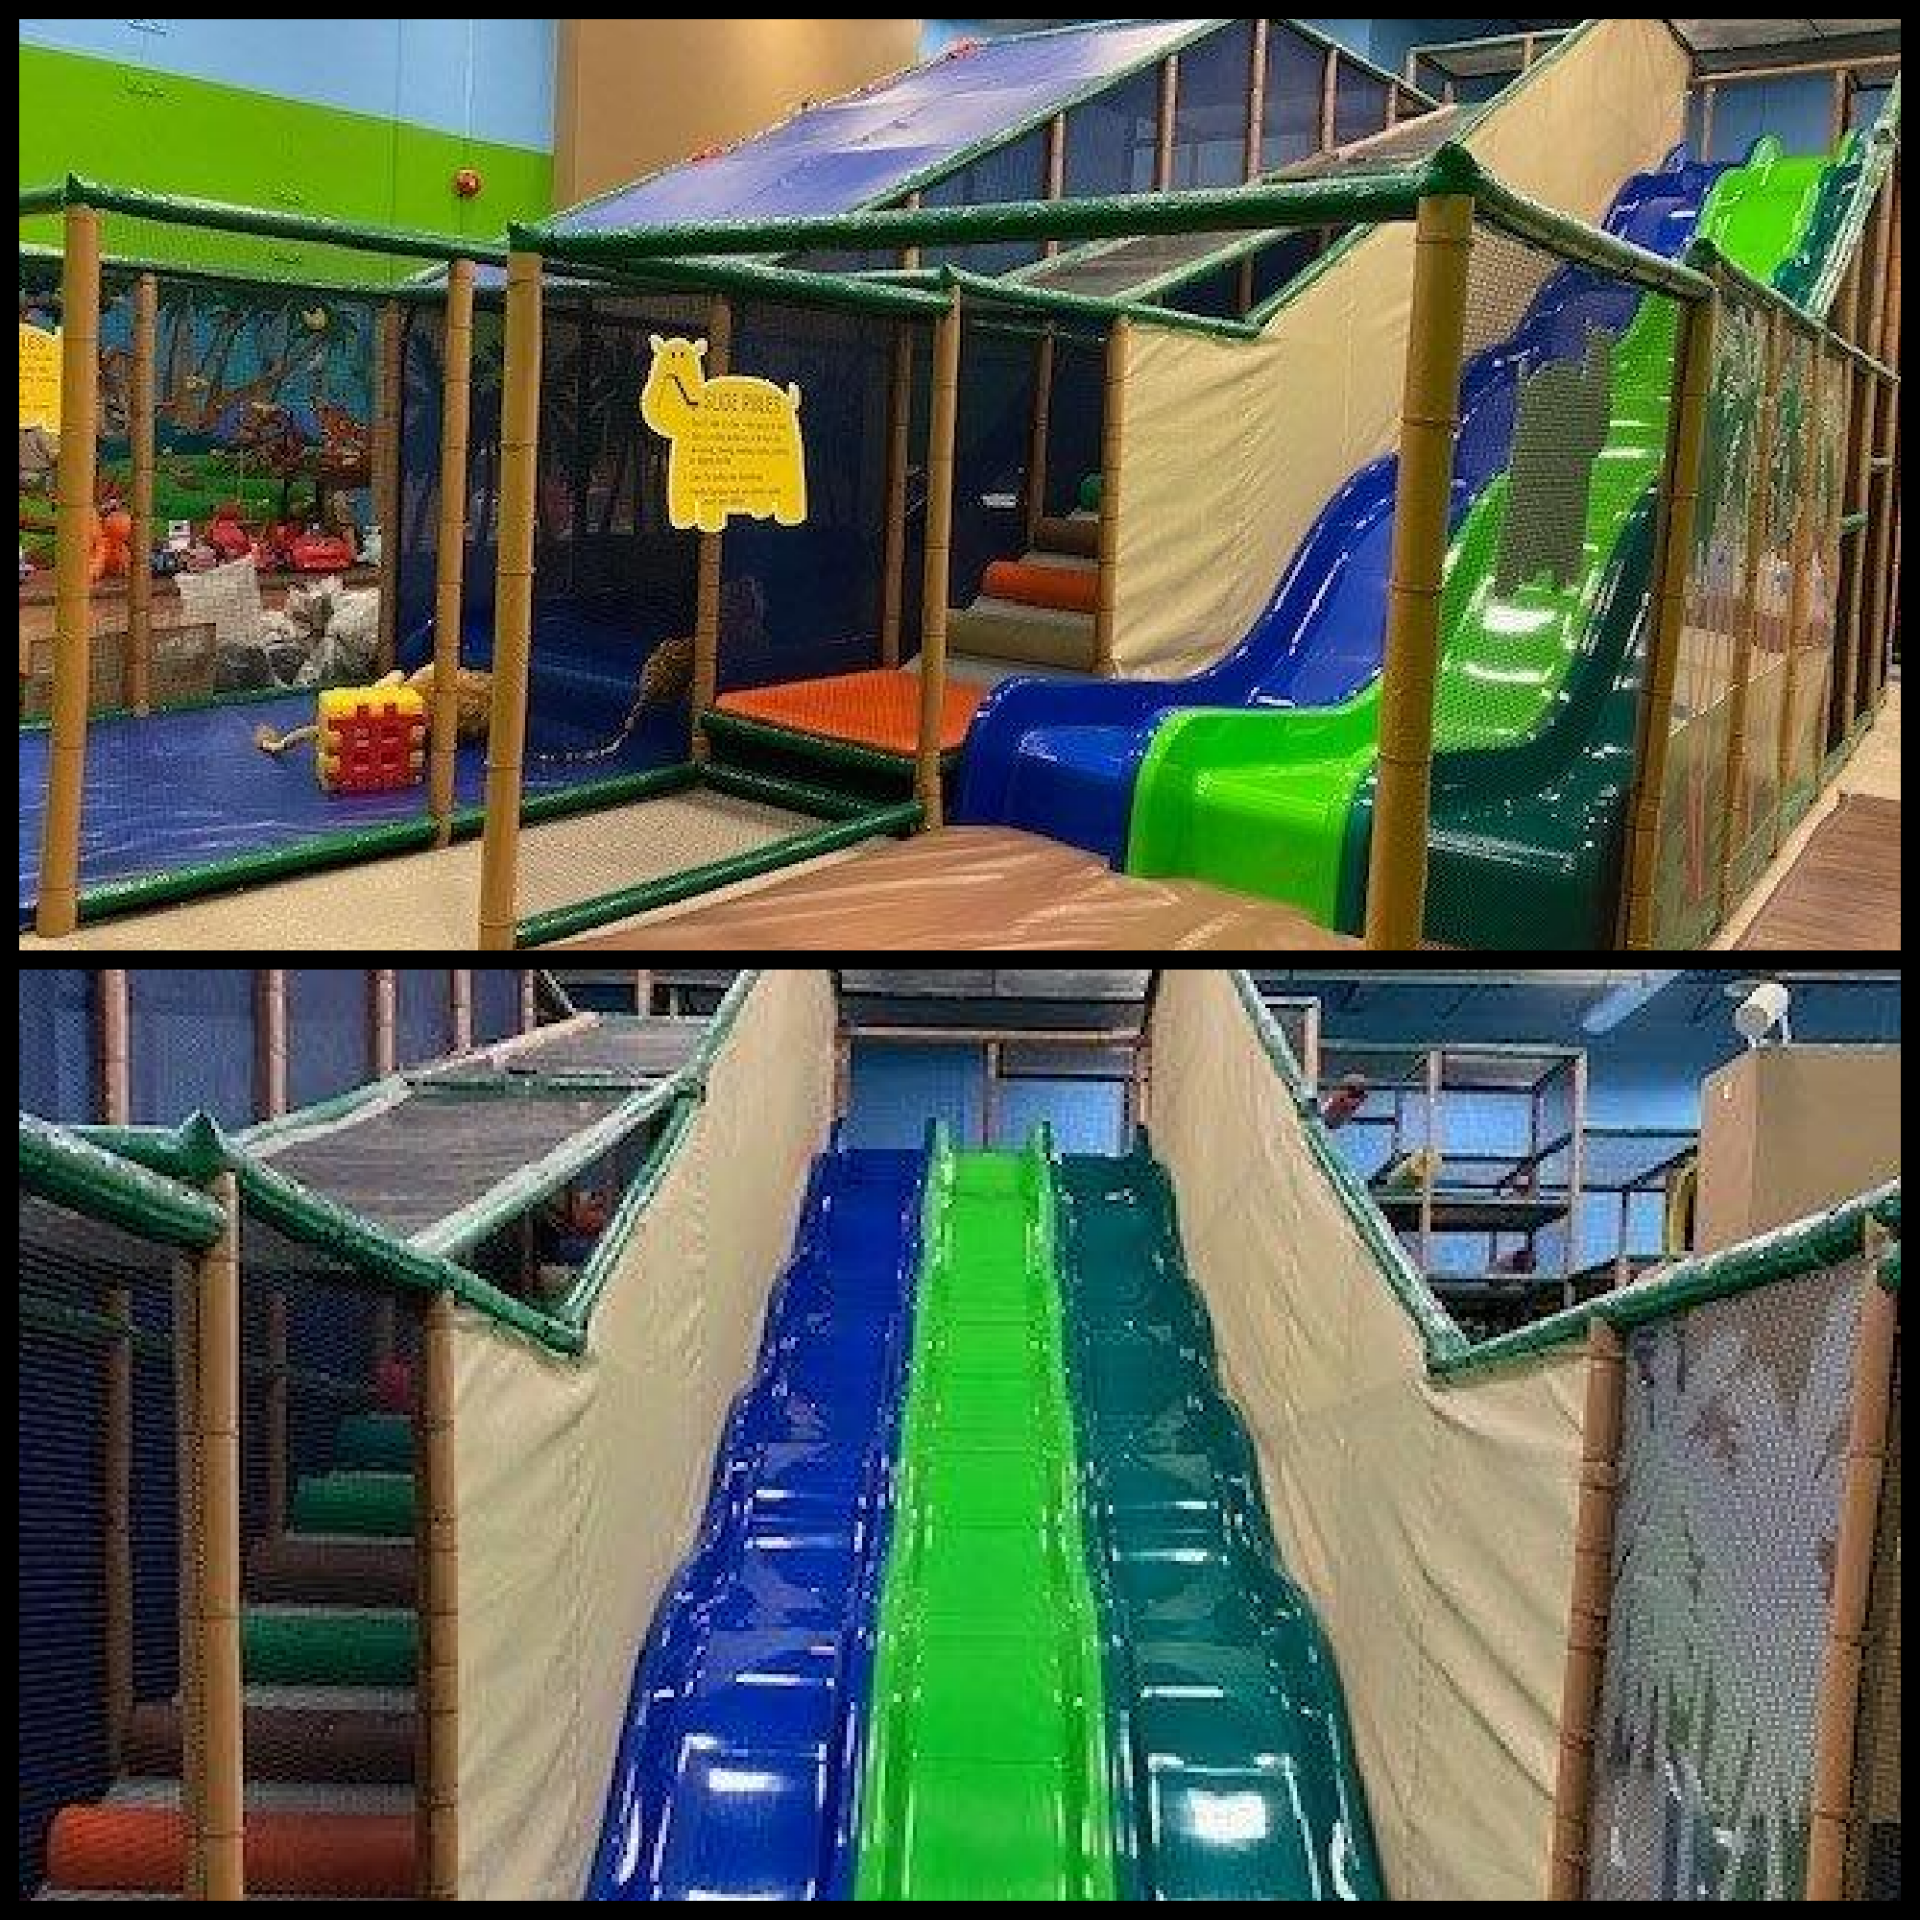 ONE INTERNATIONAL PLAY COMPANY LARGE INDOOR PLAYGROUND W/20FT HIGH SLIDES W/THREE WAVE SLIDE